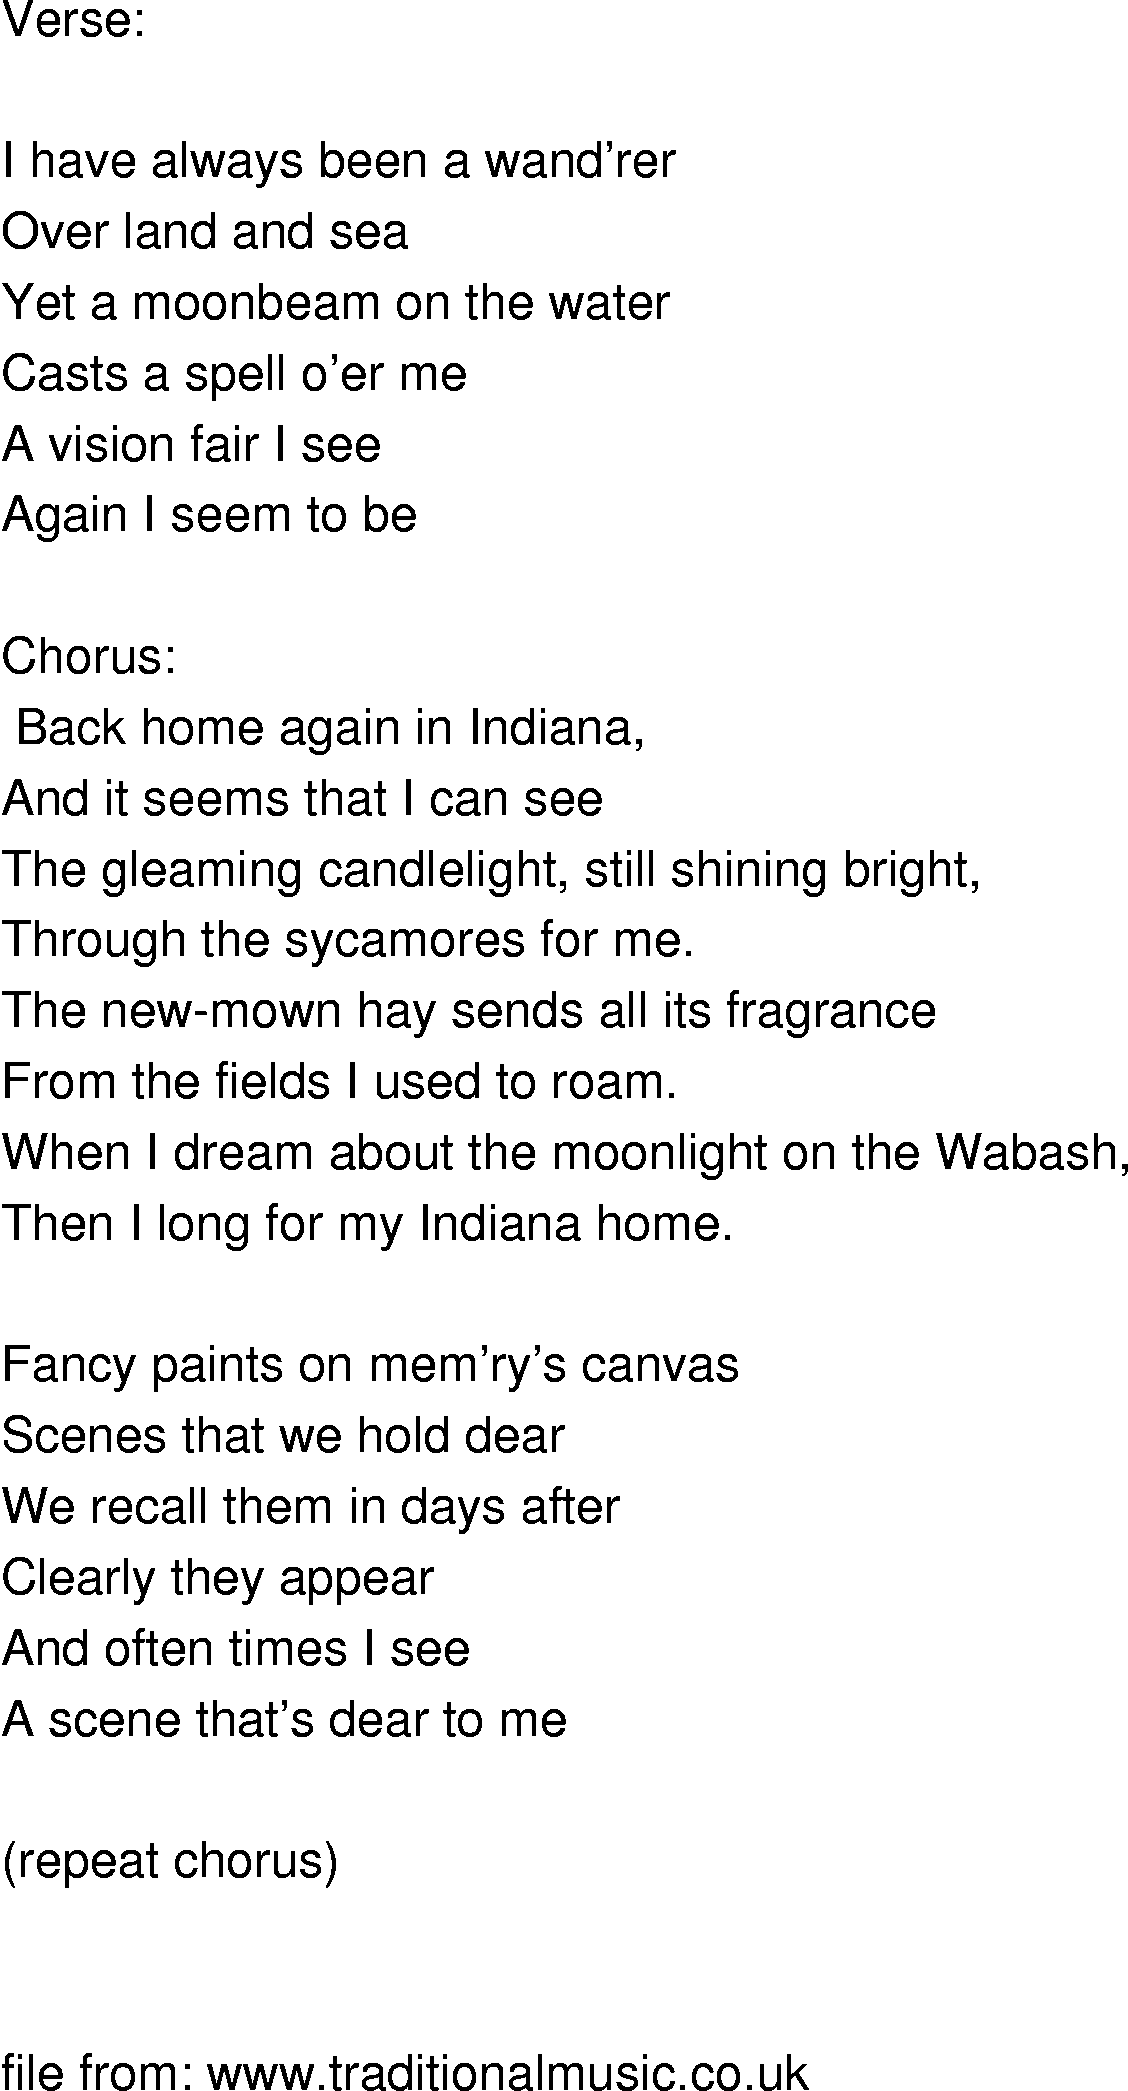 Old-Time (oldtimey) Song Lyrics - back home again in indiana